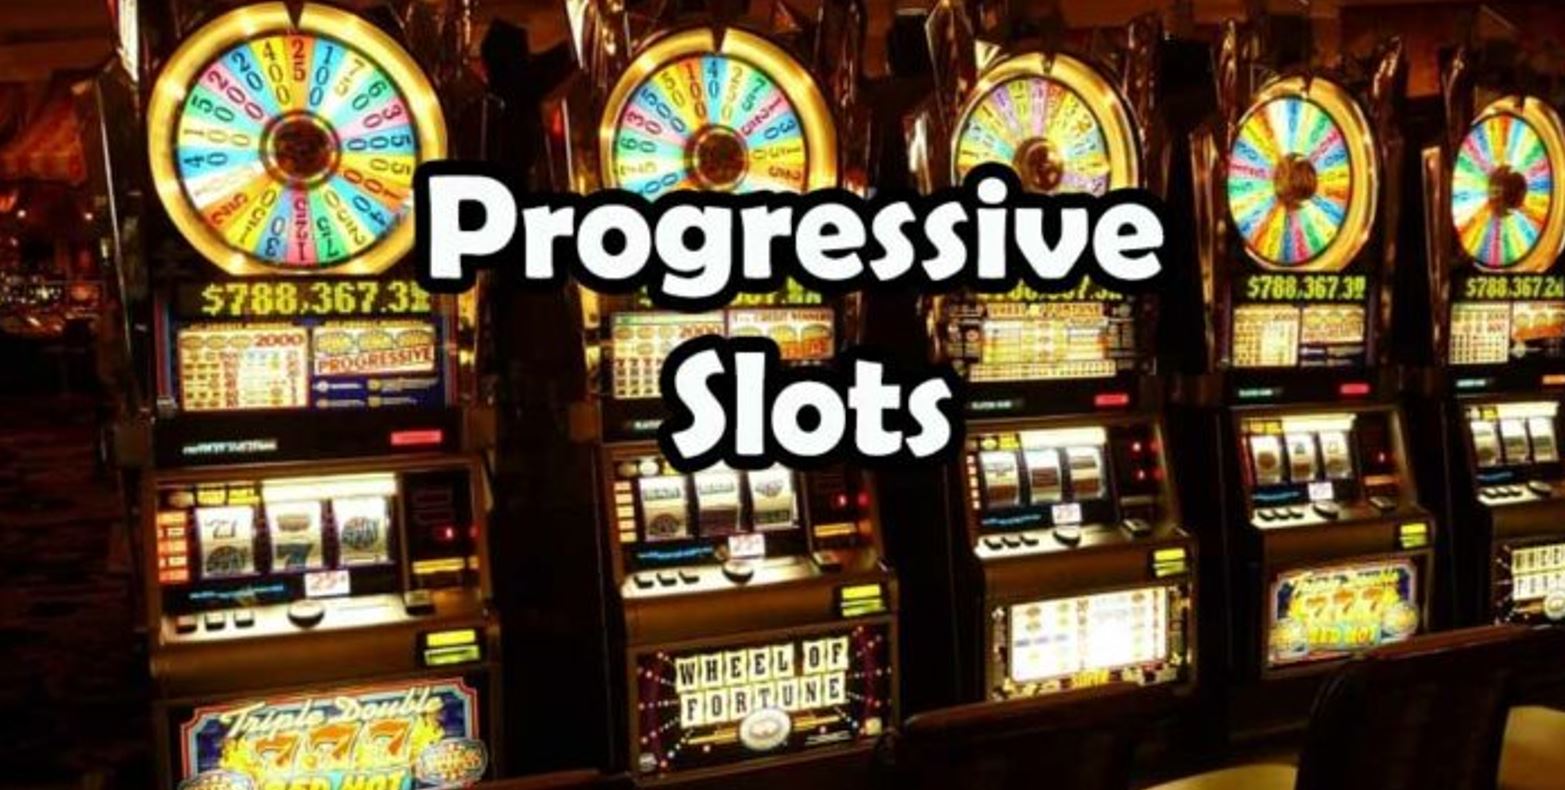 Progressive Slots – Great News For Any Gaming Enthusiast